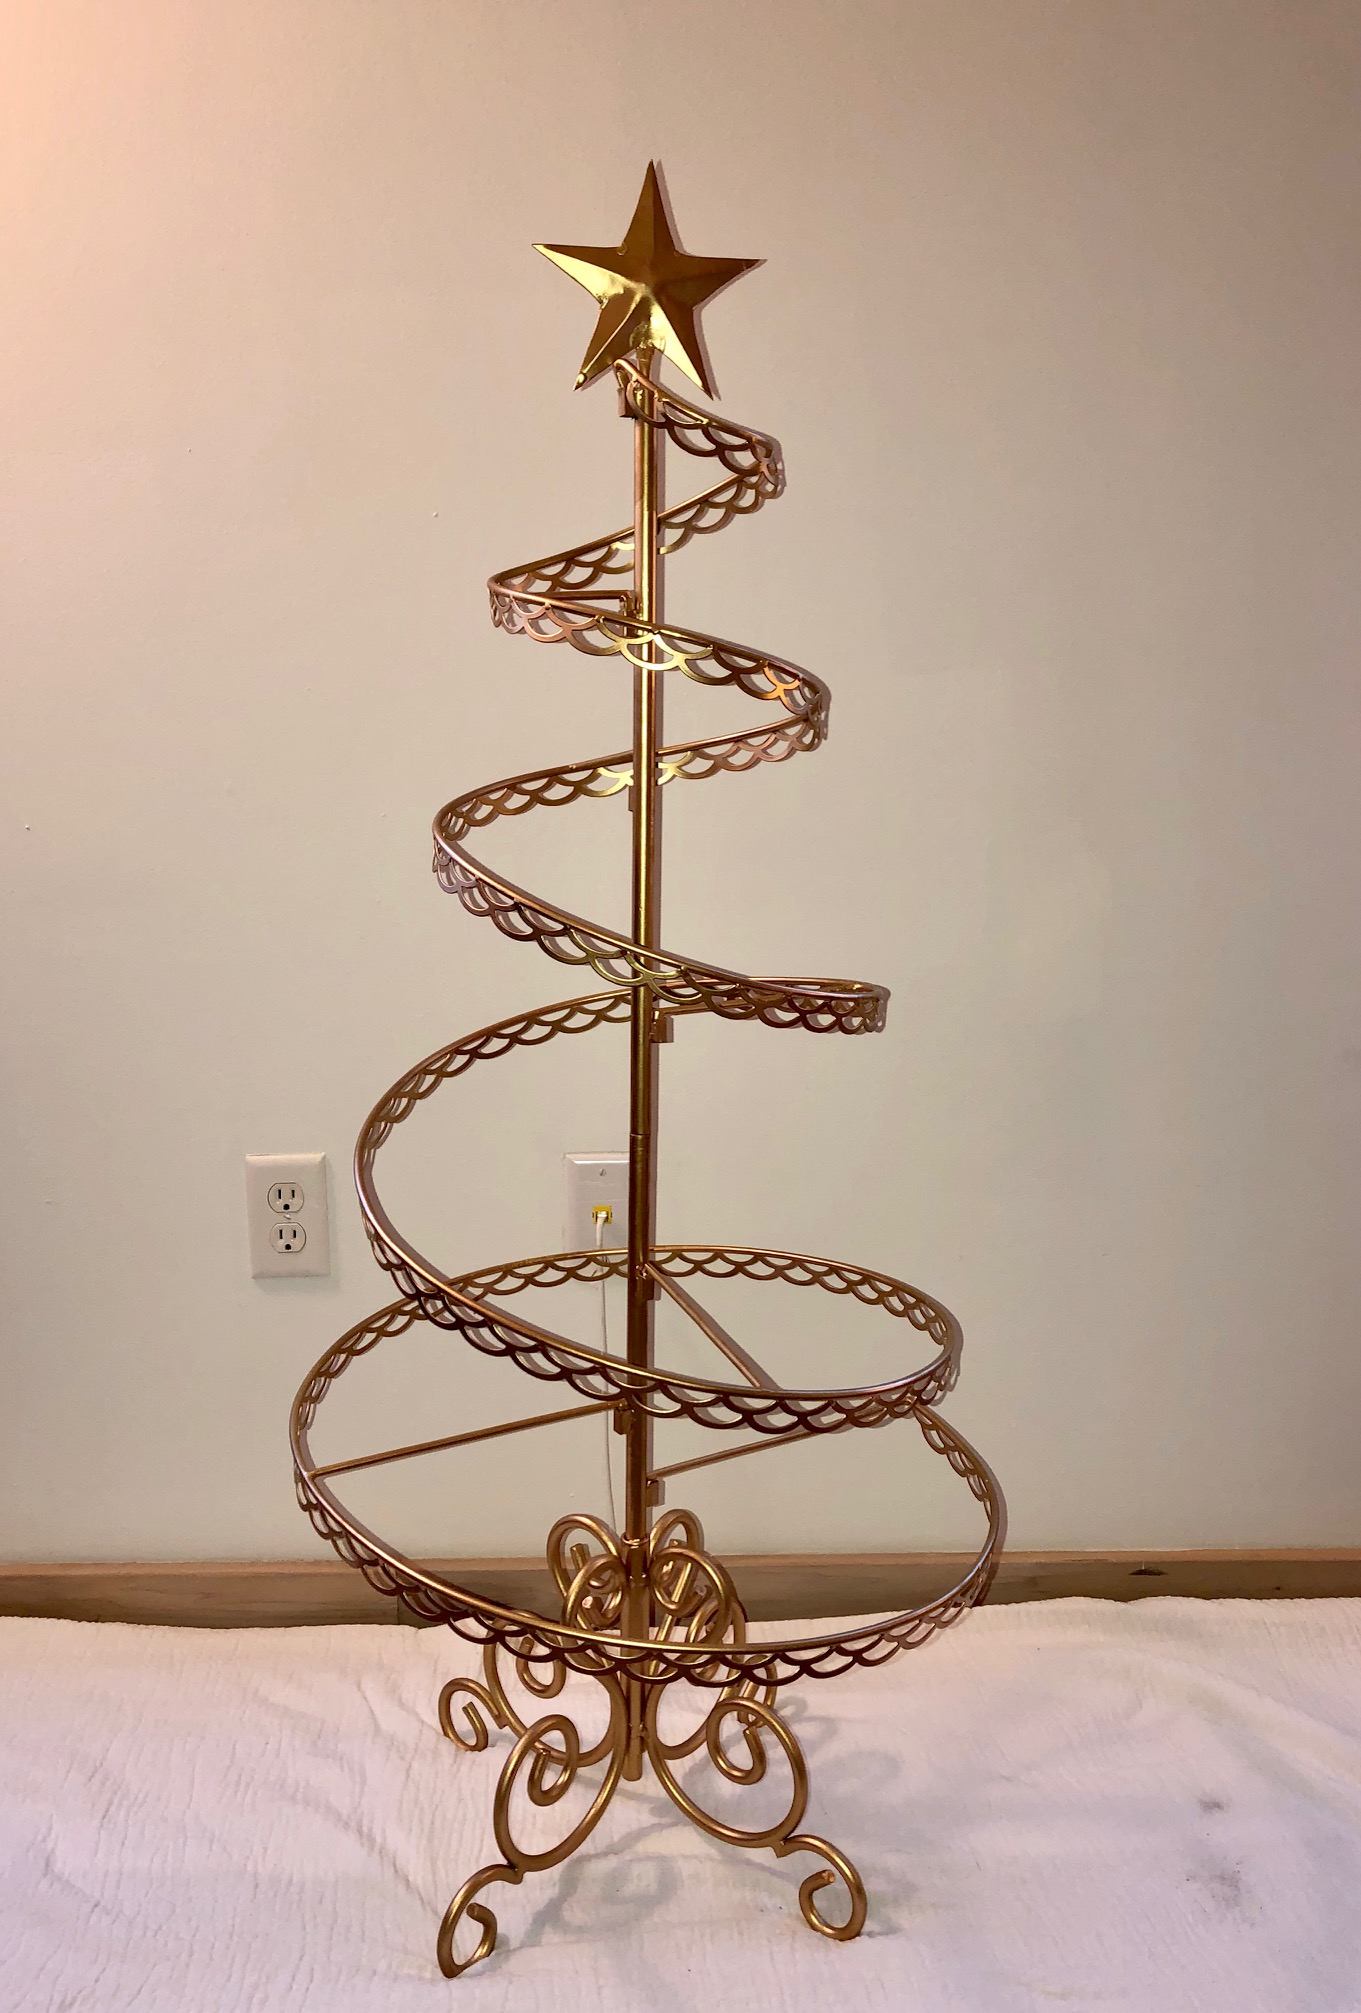   Ornament Trees - Spiral Wire Ornament Tree - 4 Foot